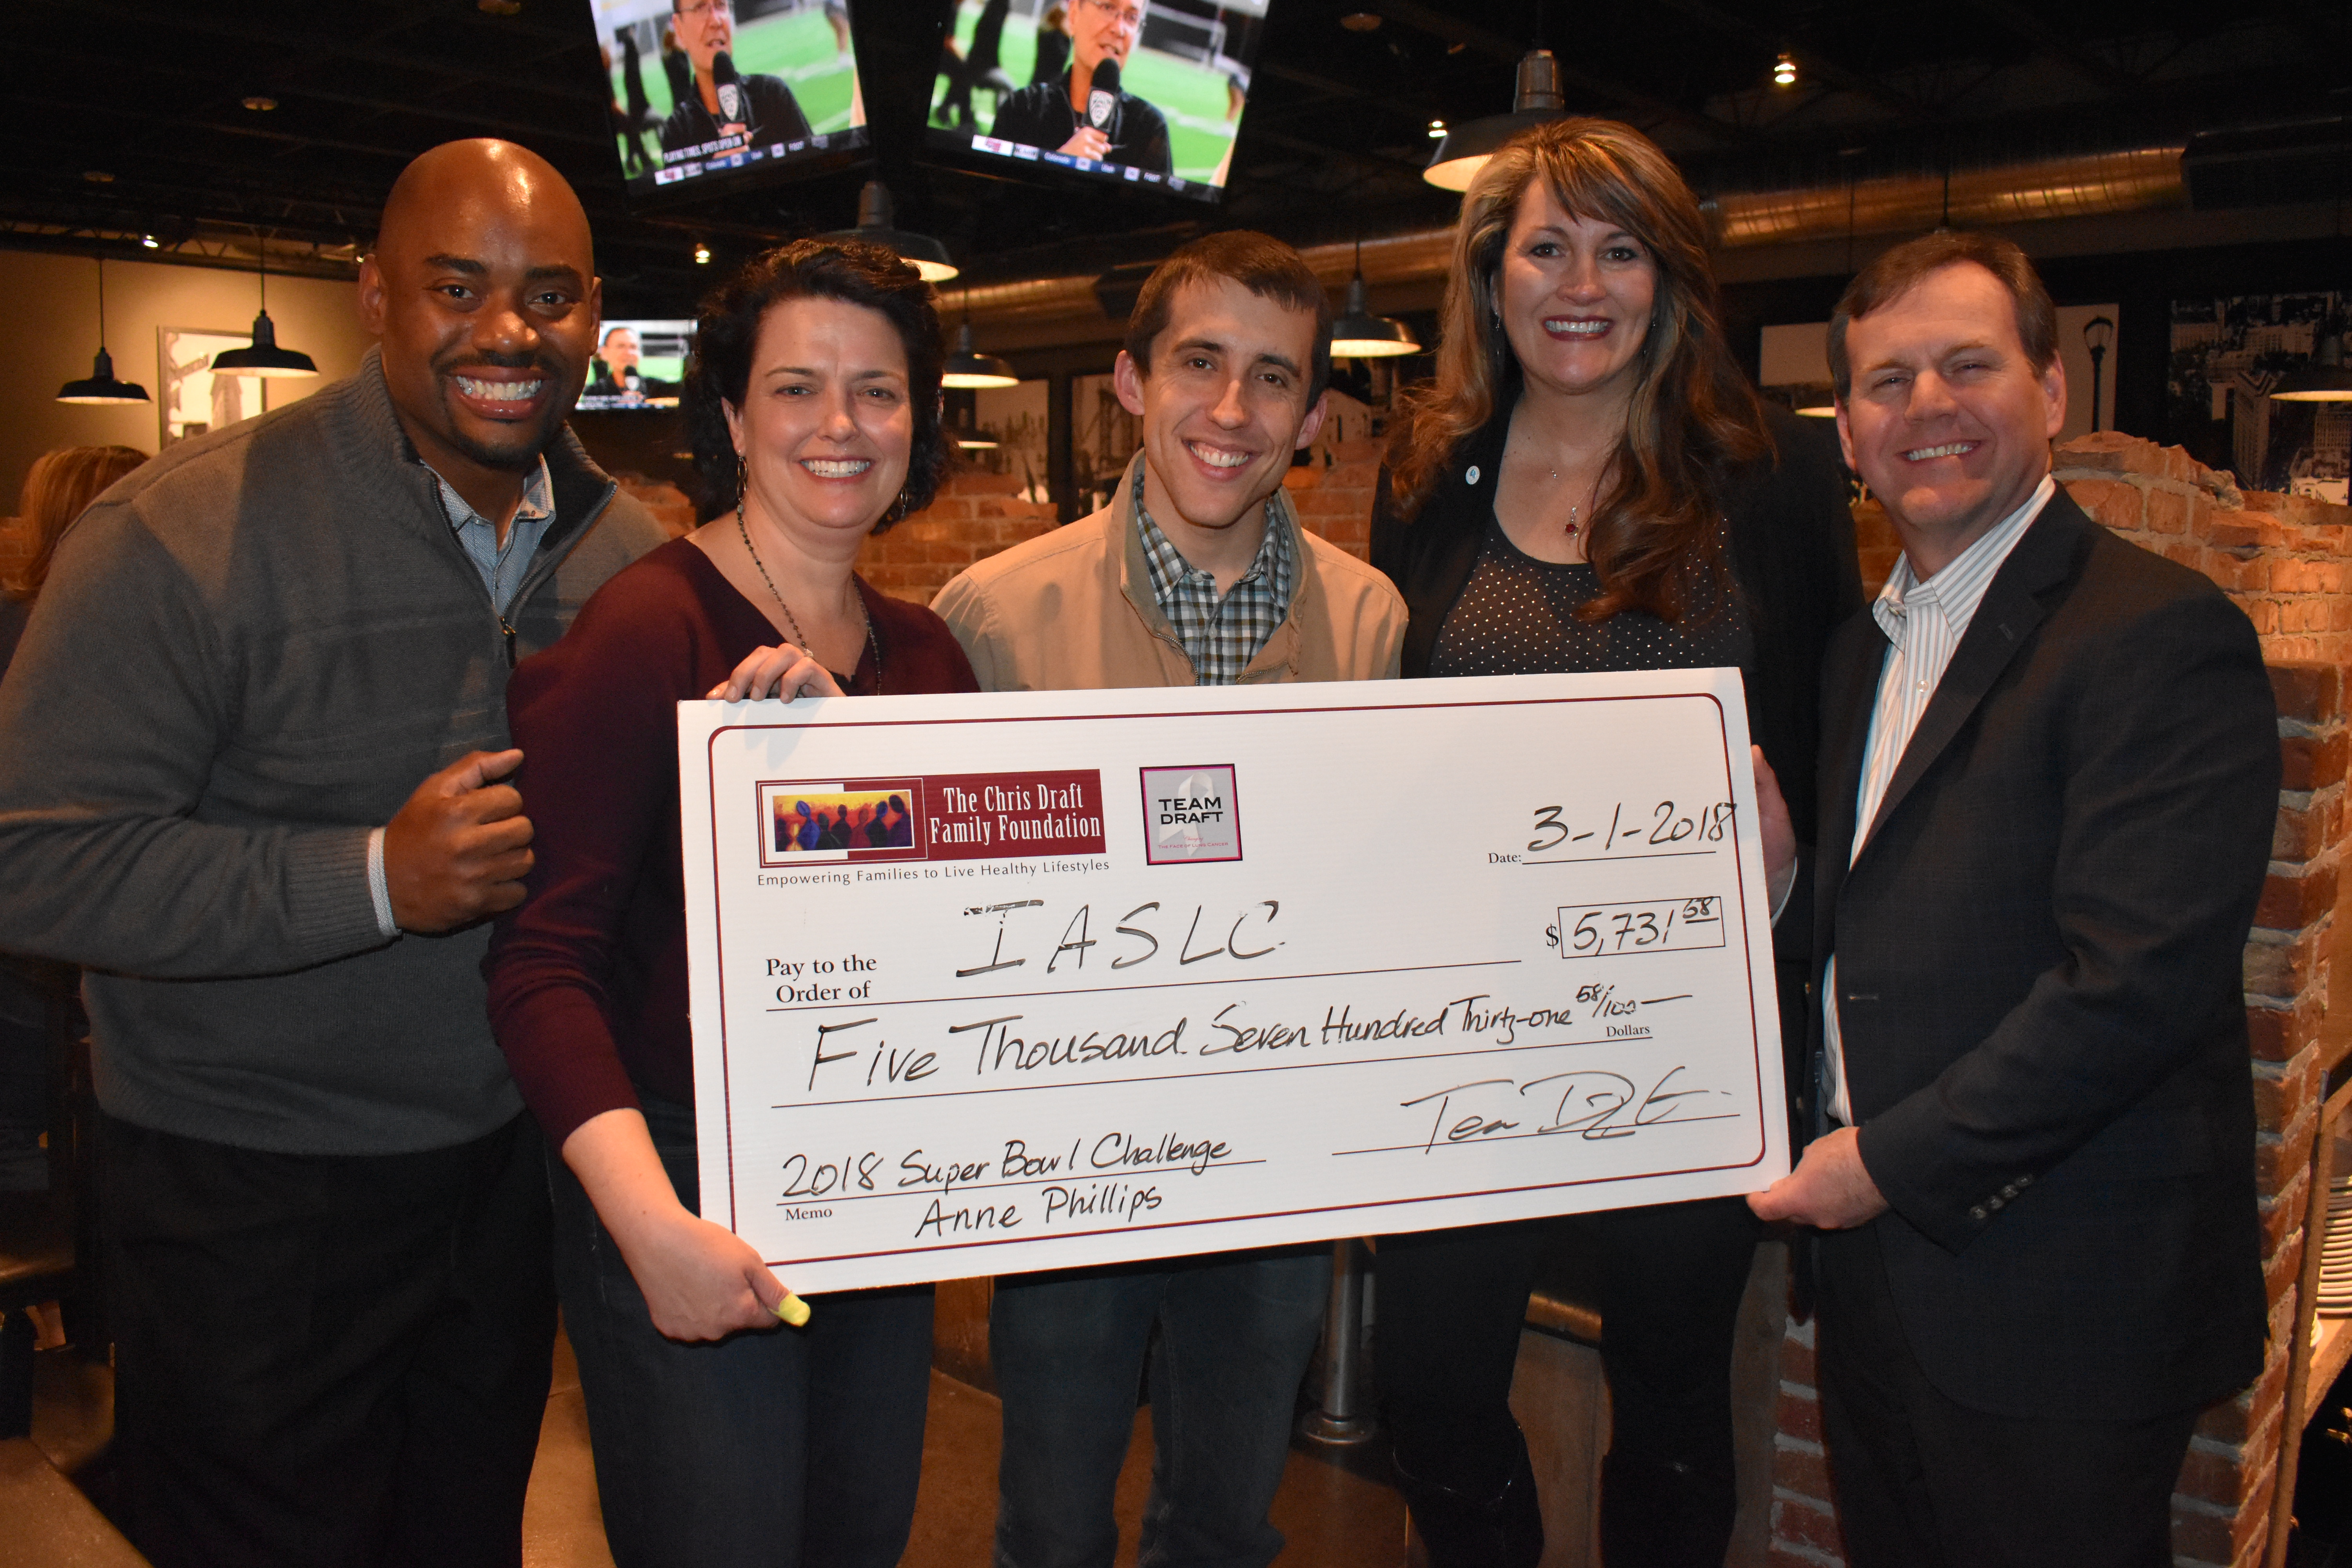 Anne & Ryan Phillips Presented a Check to the IASLC 